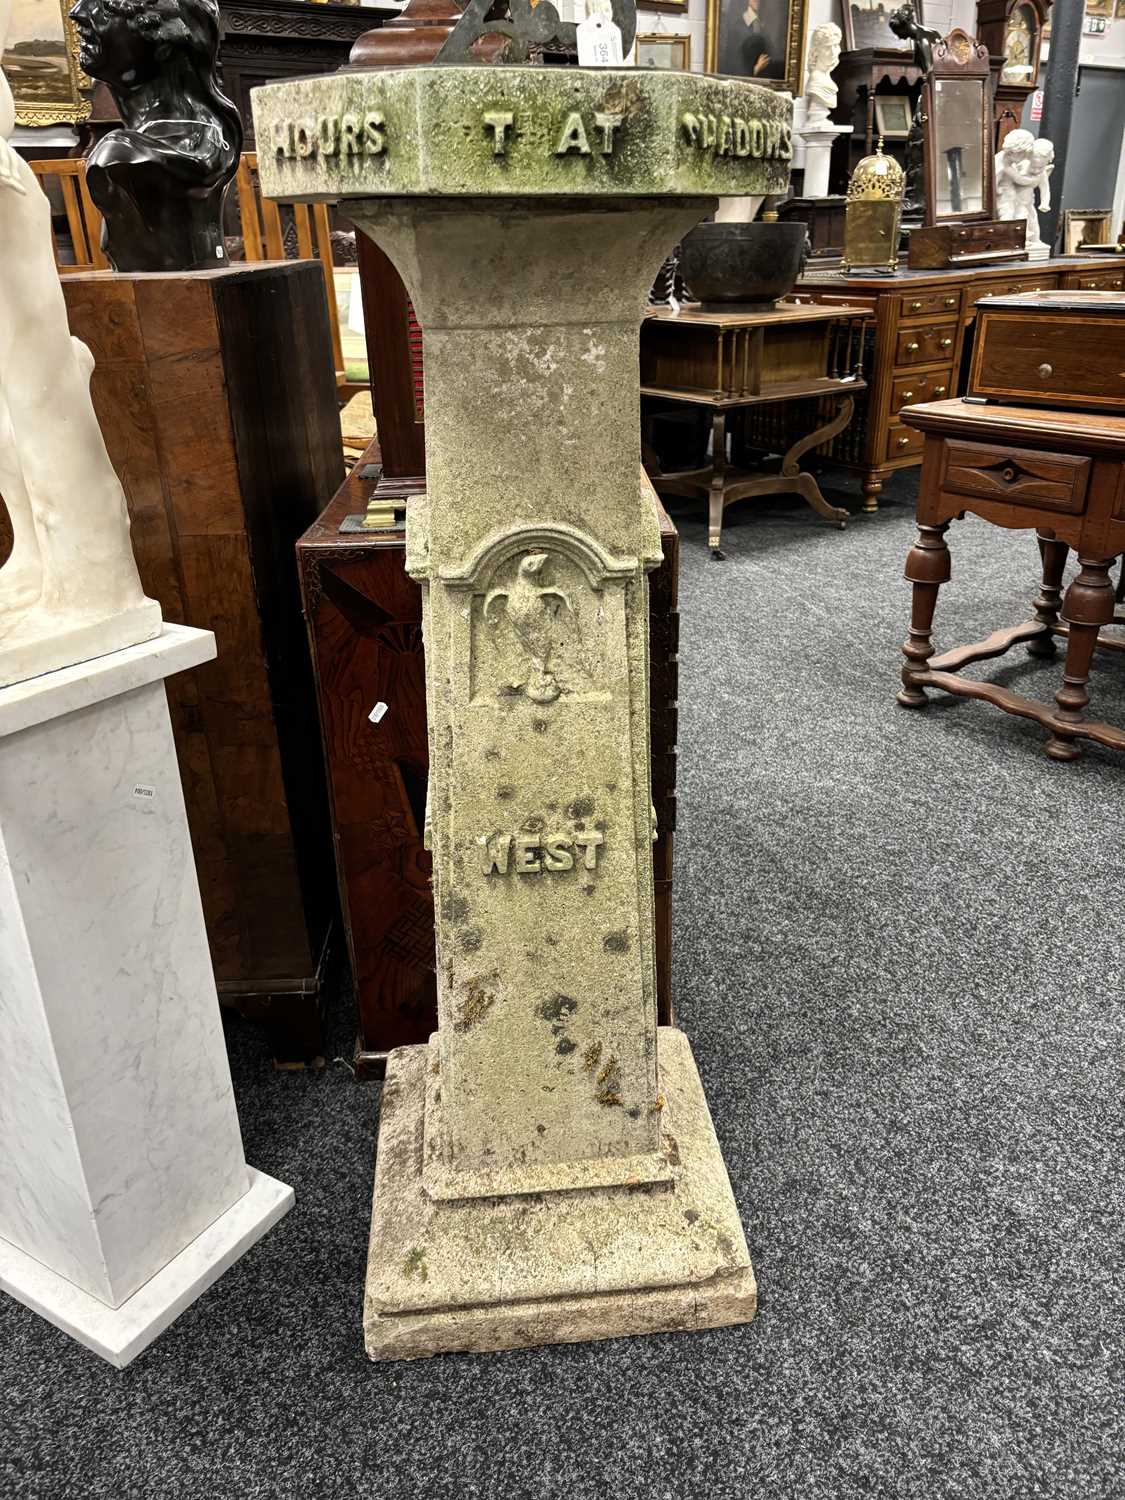 AN EARLY 18TH CENTURY BRONZE SUNDIAL DATED 1717 RAISED ON AN ARTS AND CRAFTS COMPOSITE STONE BASE - Image 16 of 17